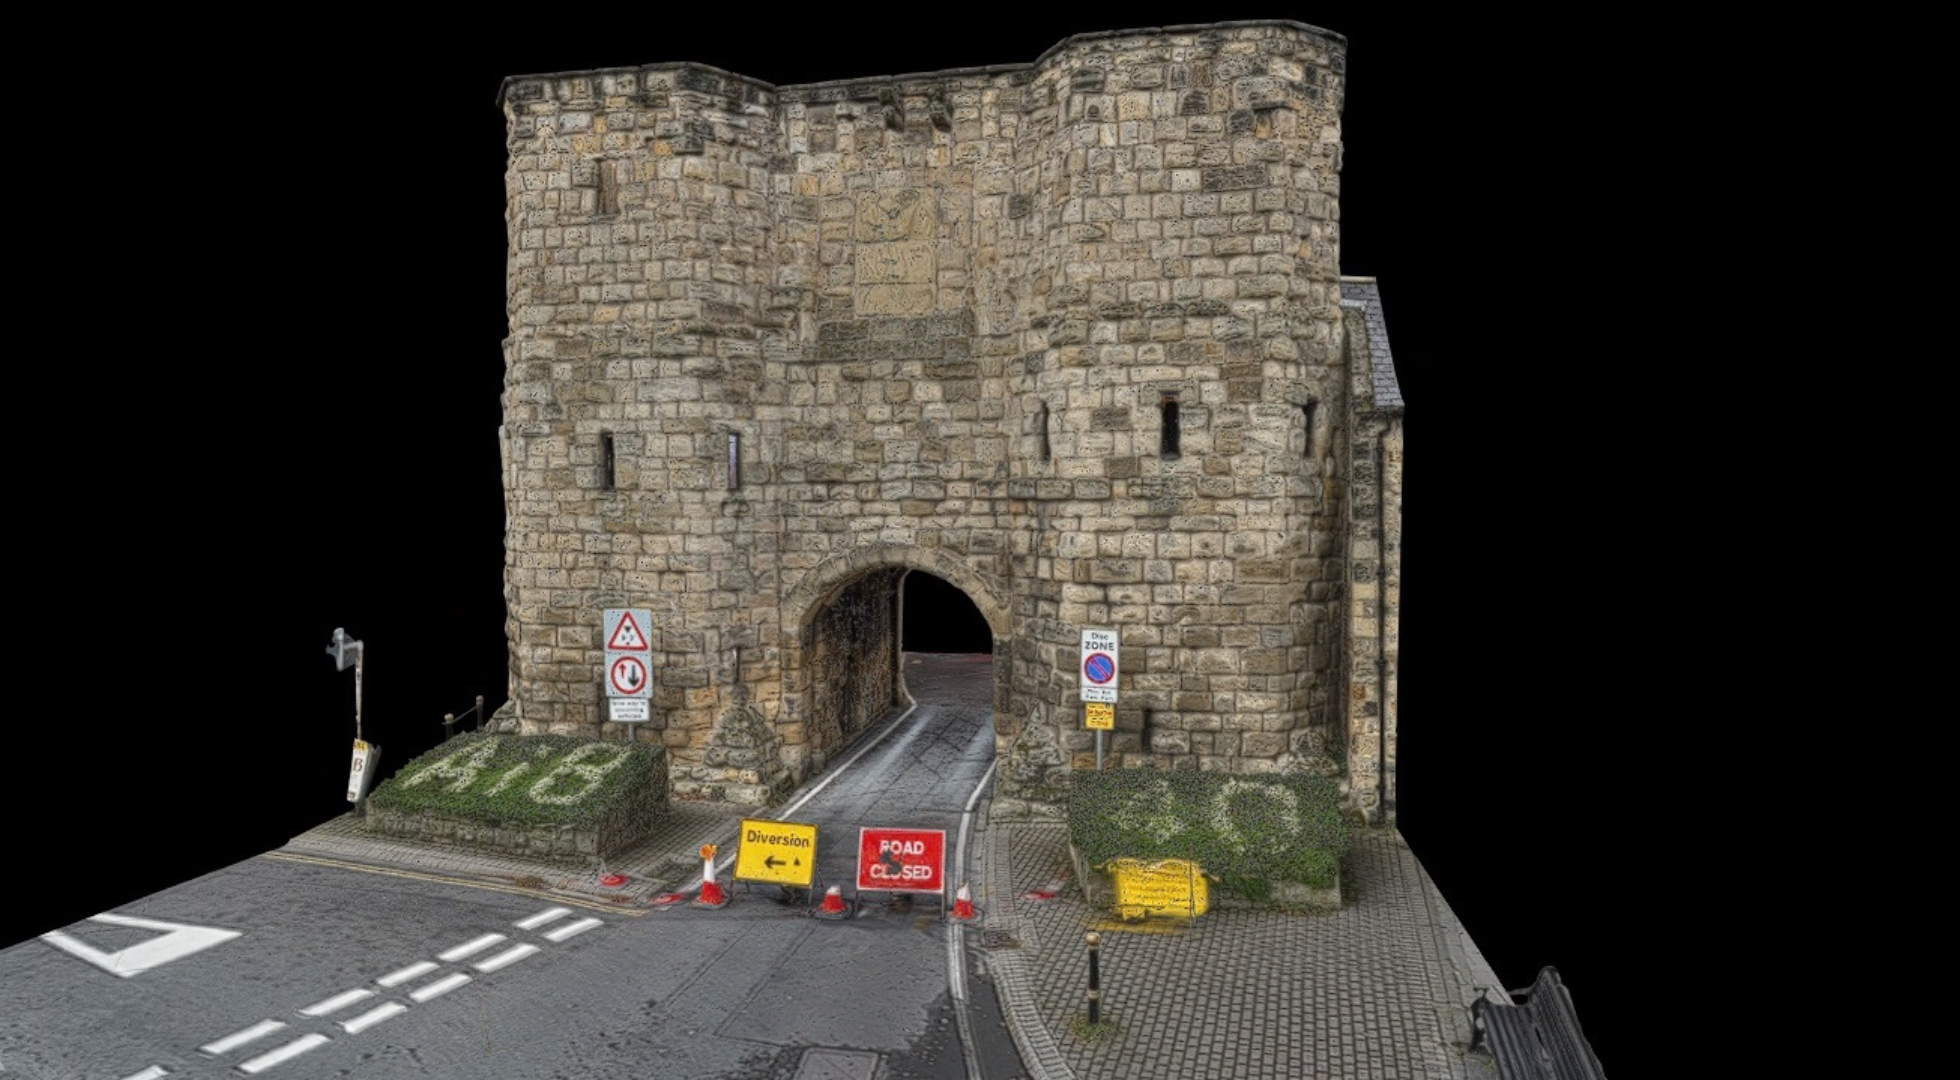 3D modelling for heritage conservation with drone photogrammetry.